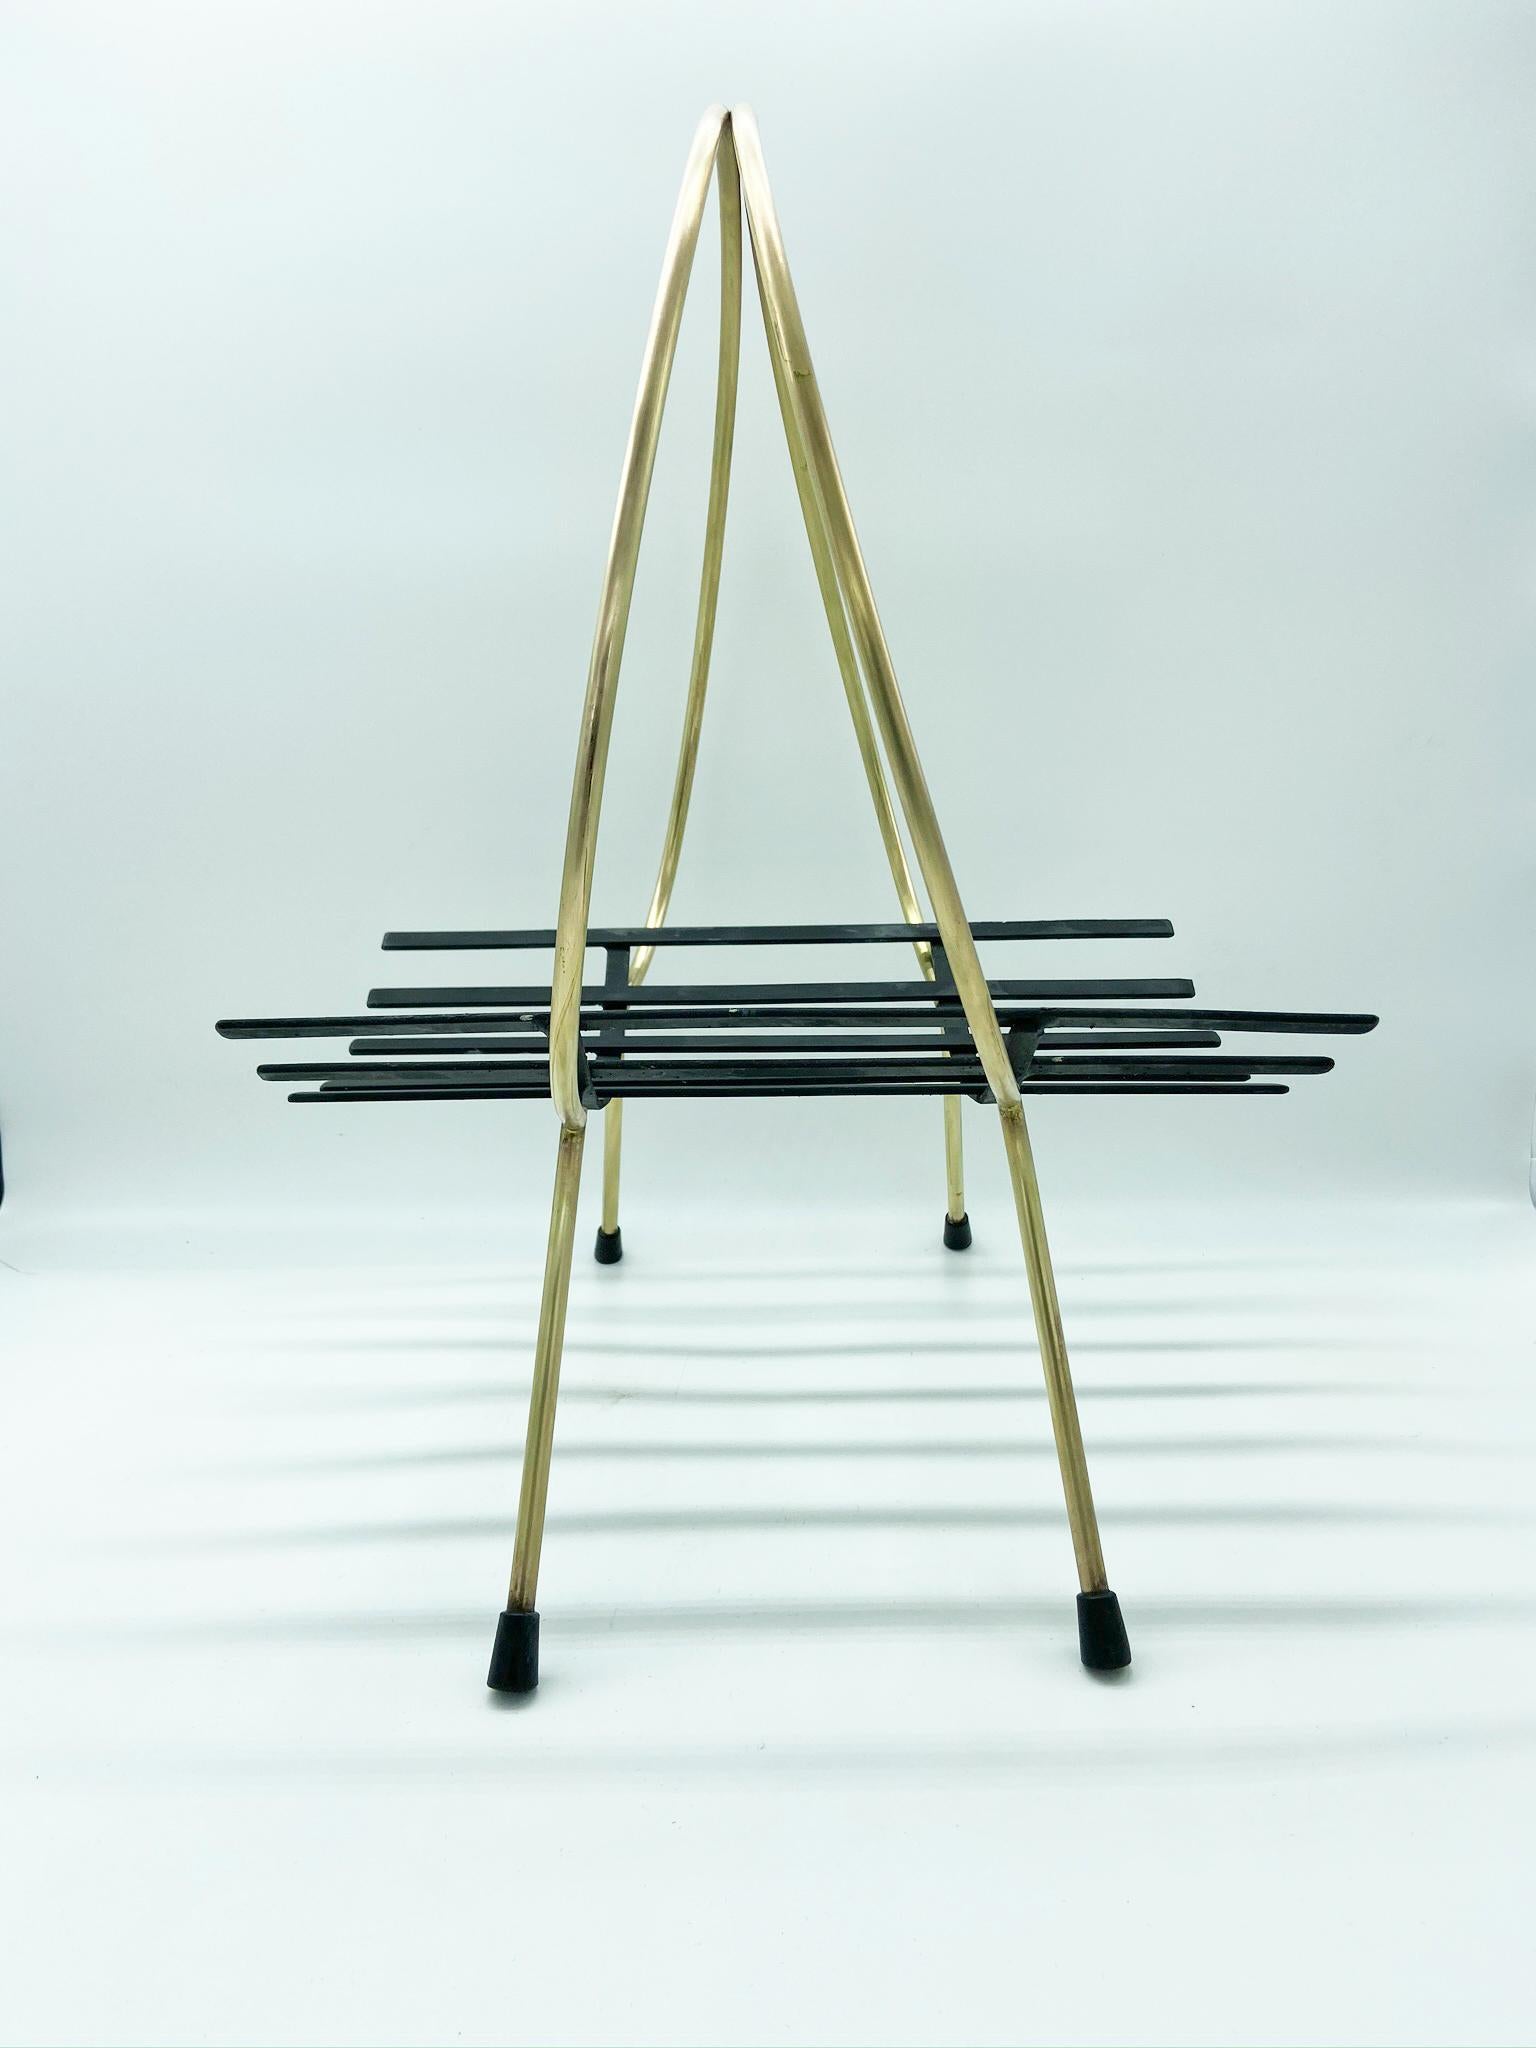 Magazine rack, manufactured in Italy in 1950s
Made of solid brass and black enameled iron.